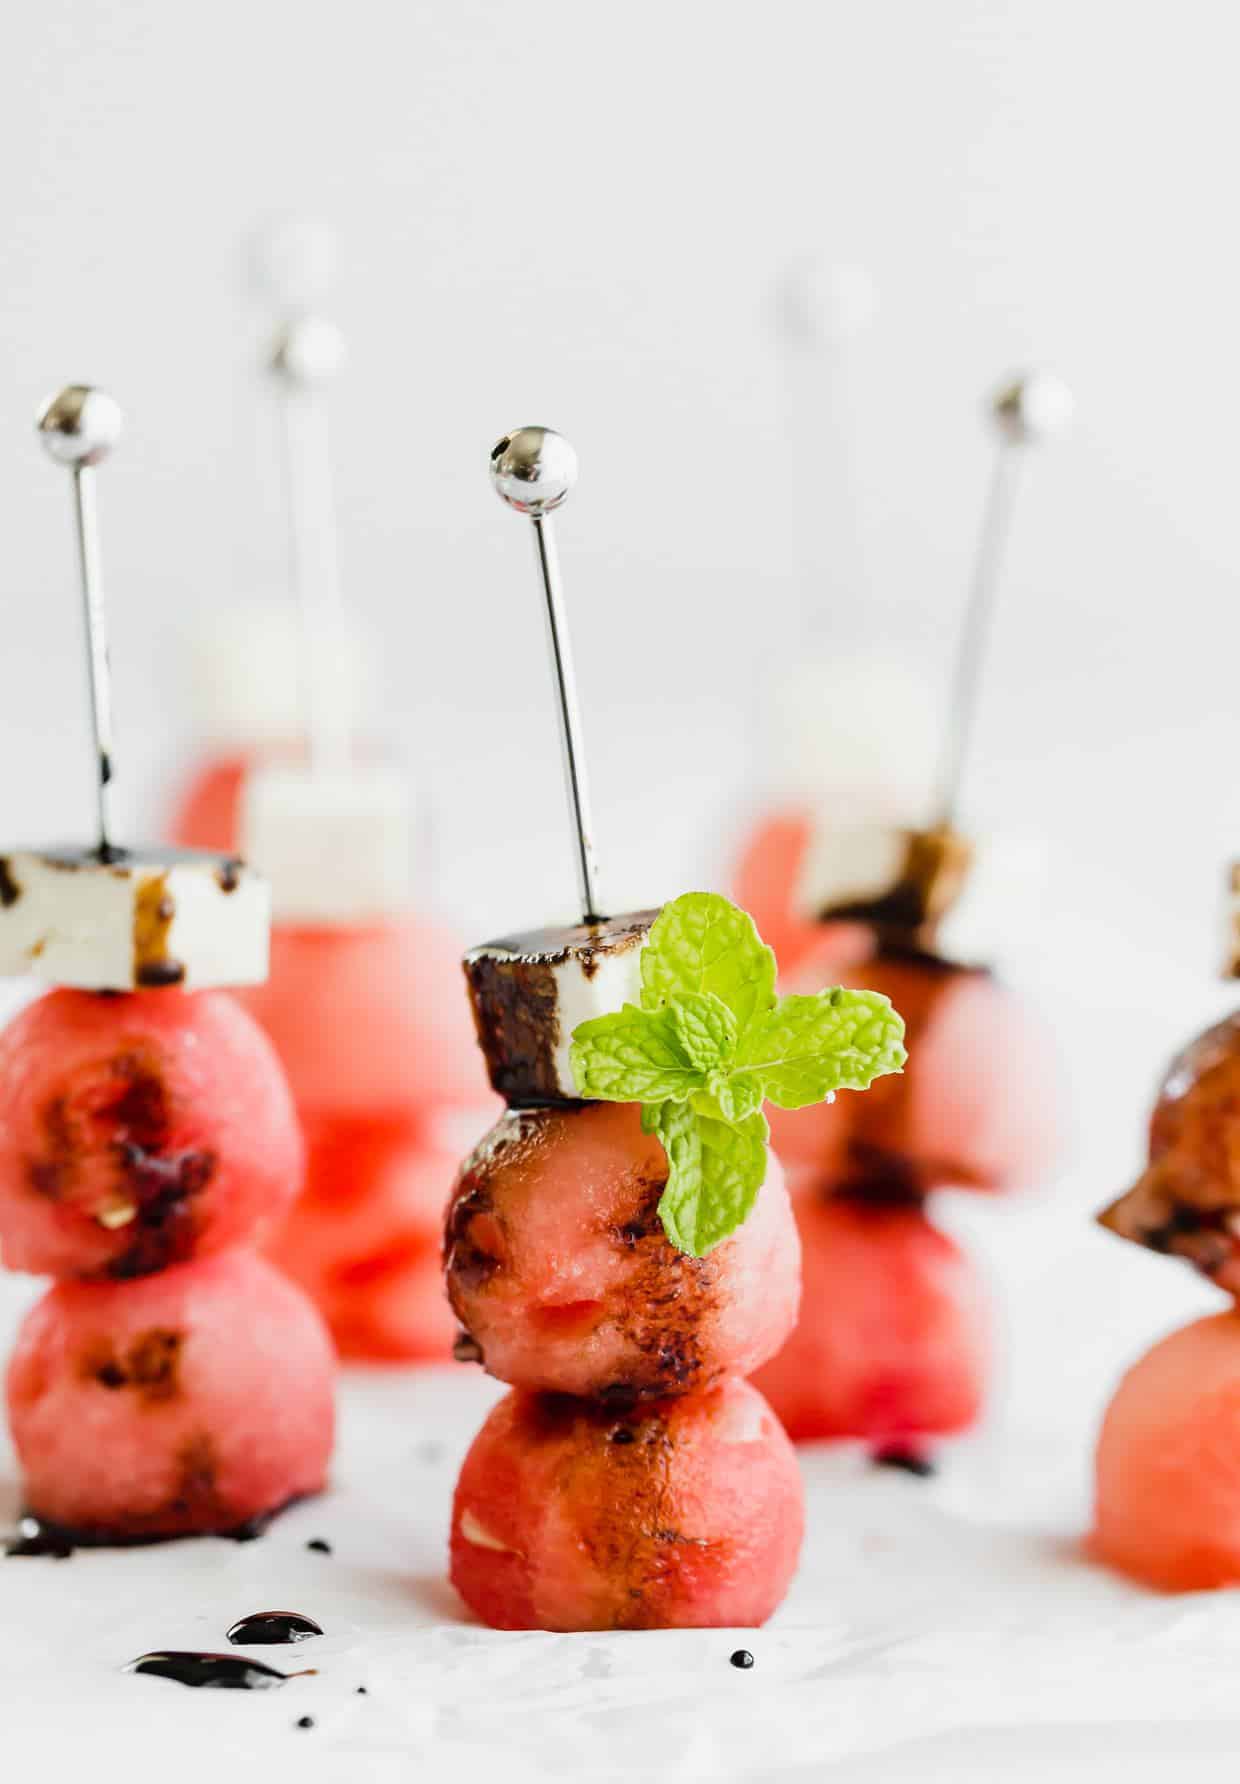 Two watermelon balls and a block of feta on small skewers, drizzled with balsamic reduction and a mint leaf for garnish.